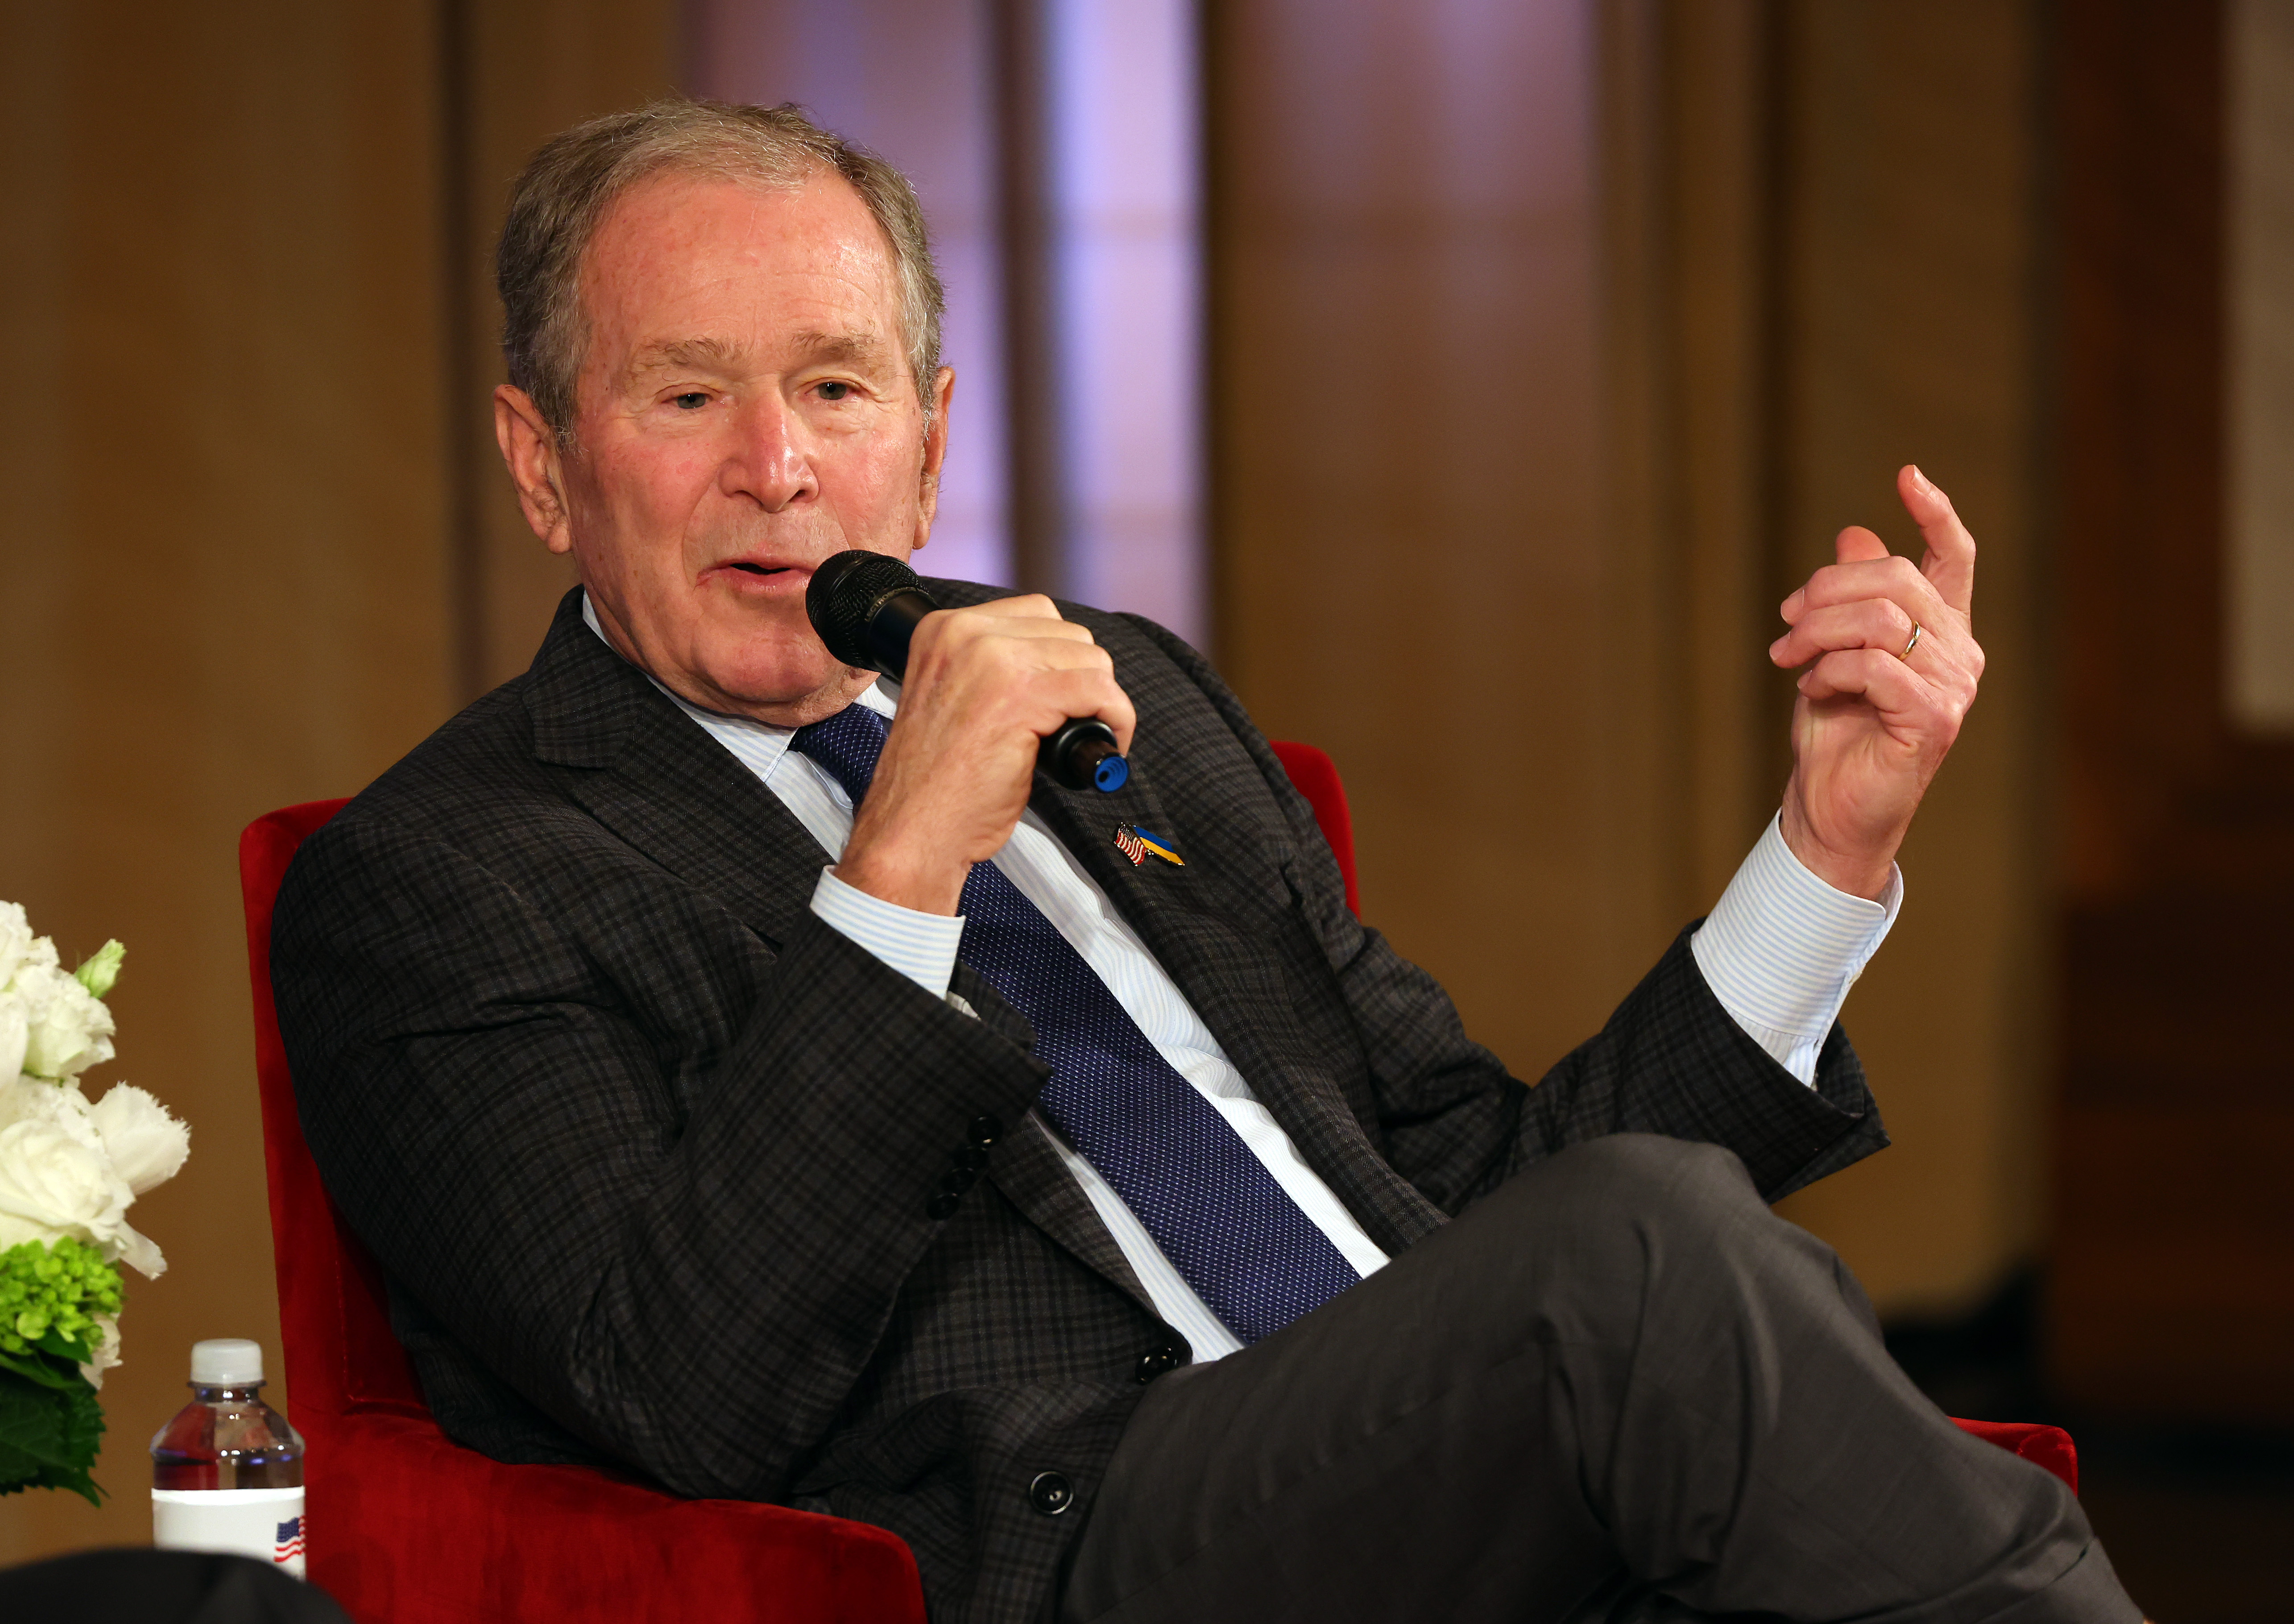 Bush sits in a chair and speaks into a microphone.